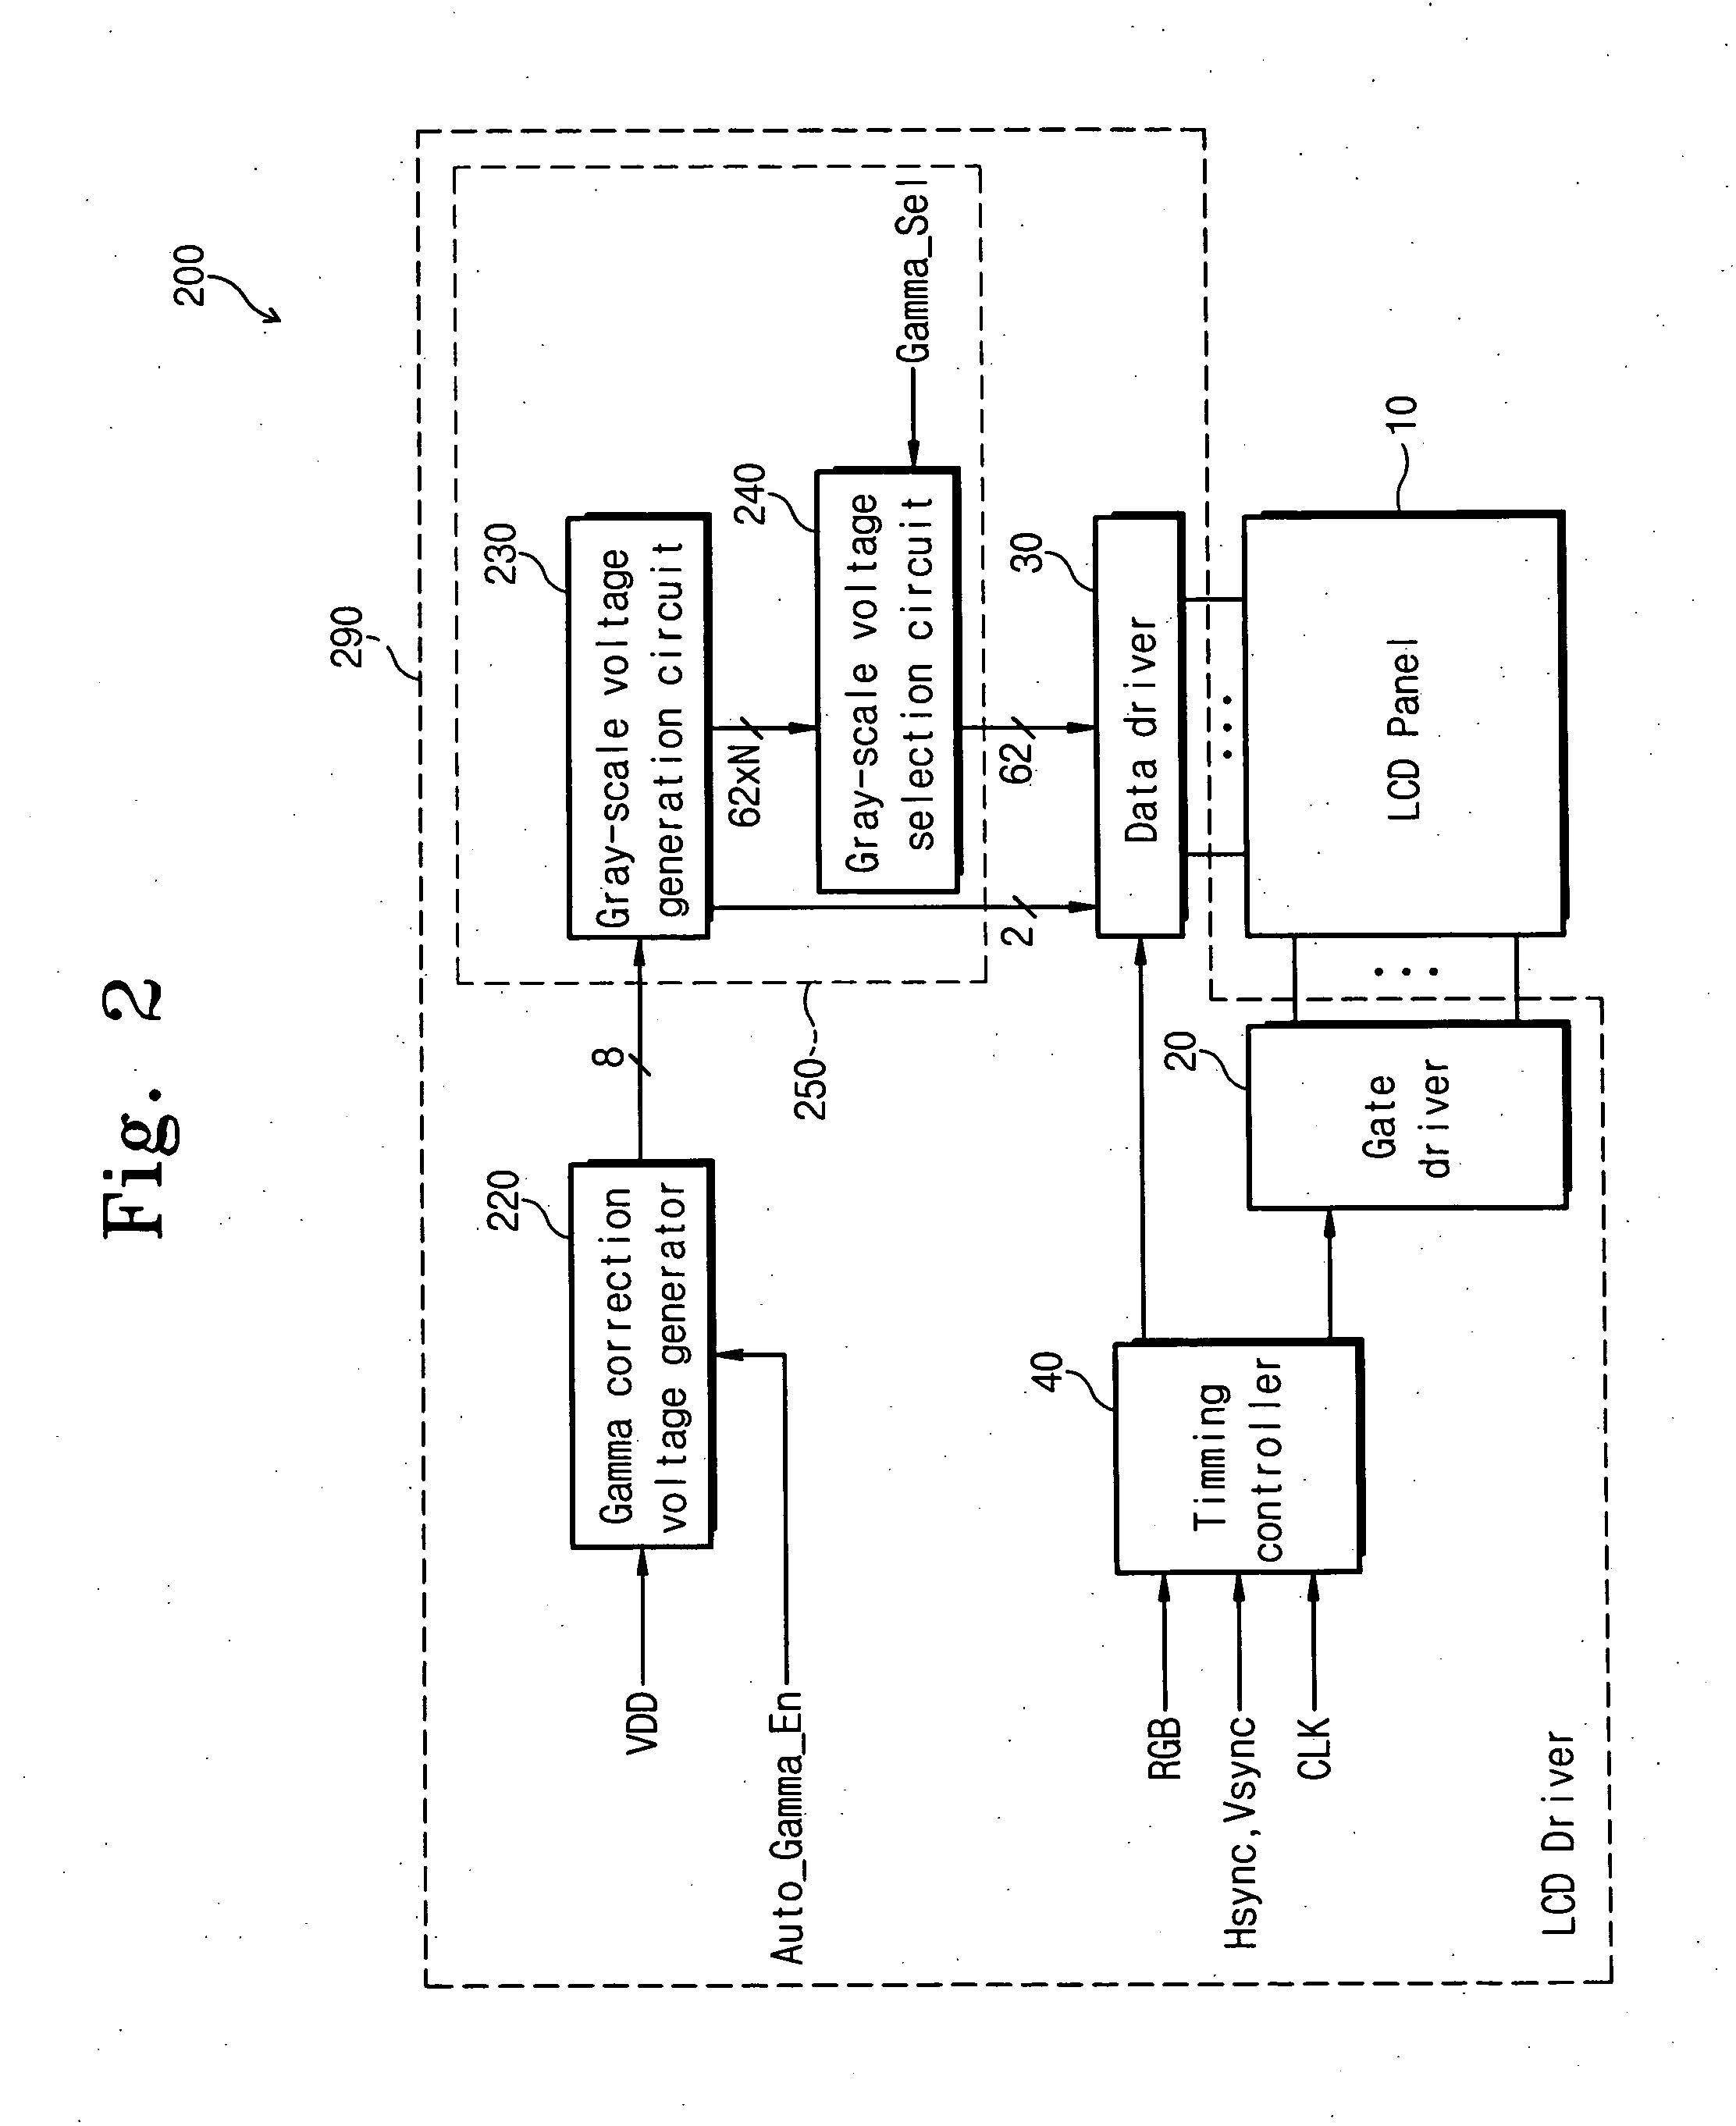 Gamma correction device, display apparatus including the same, and method of gamma correction therein